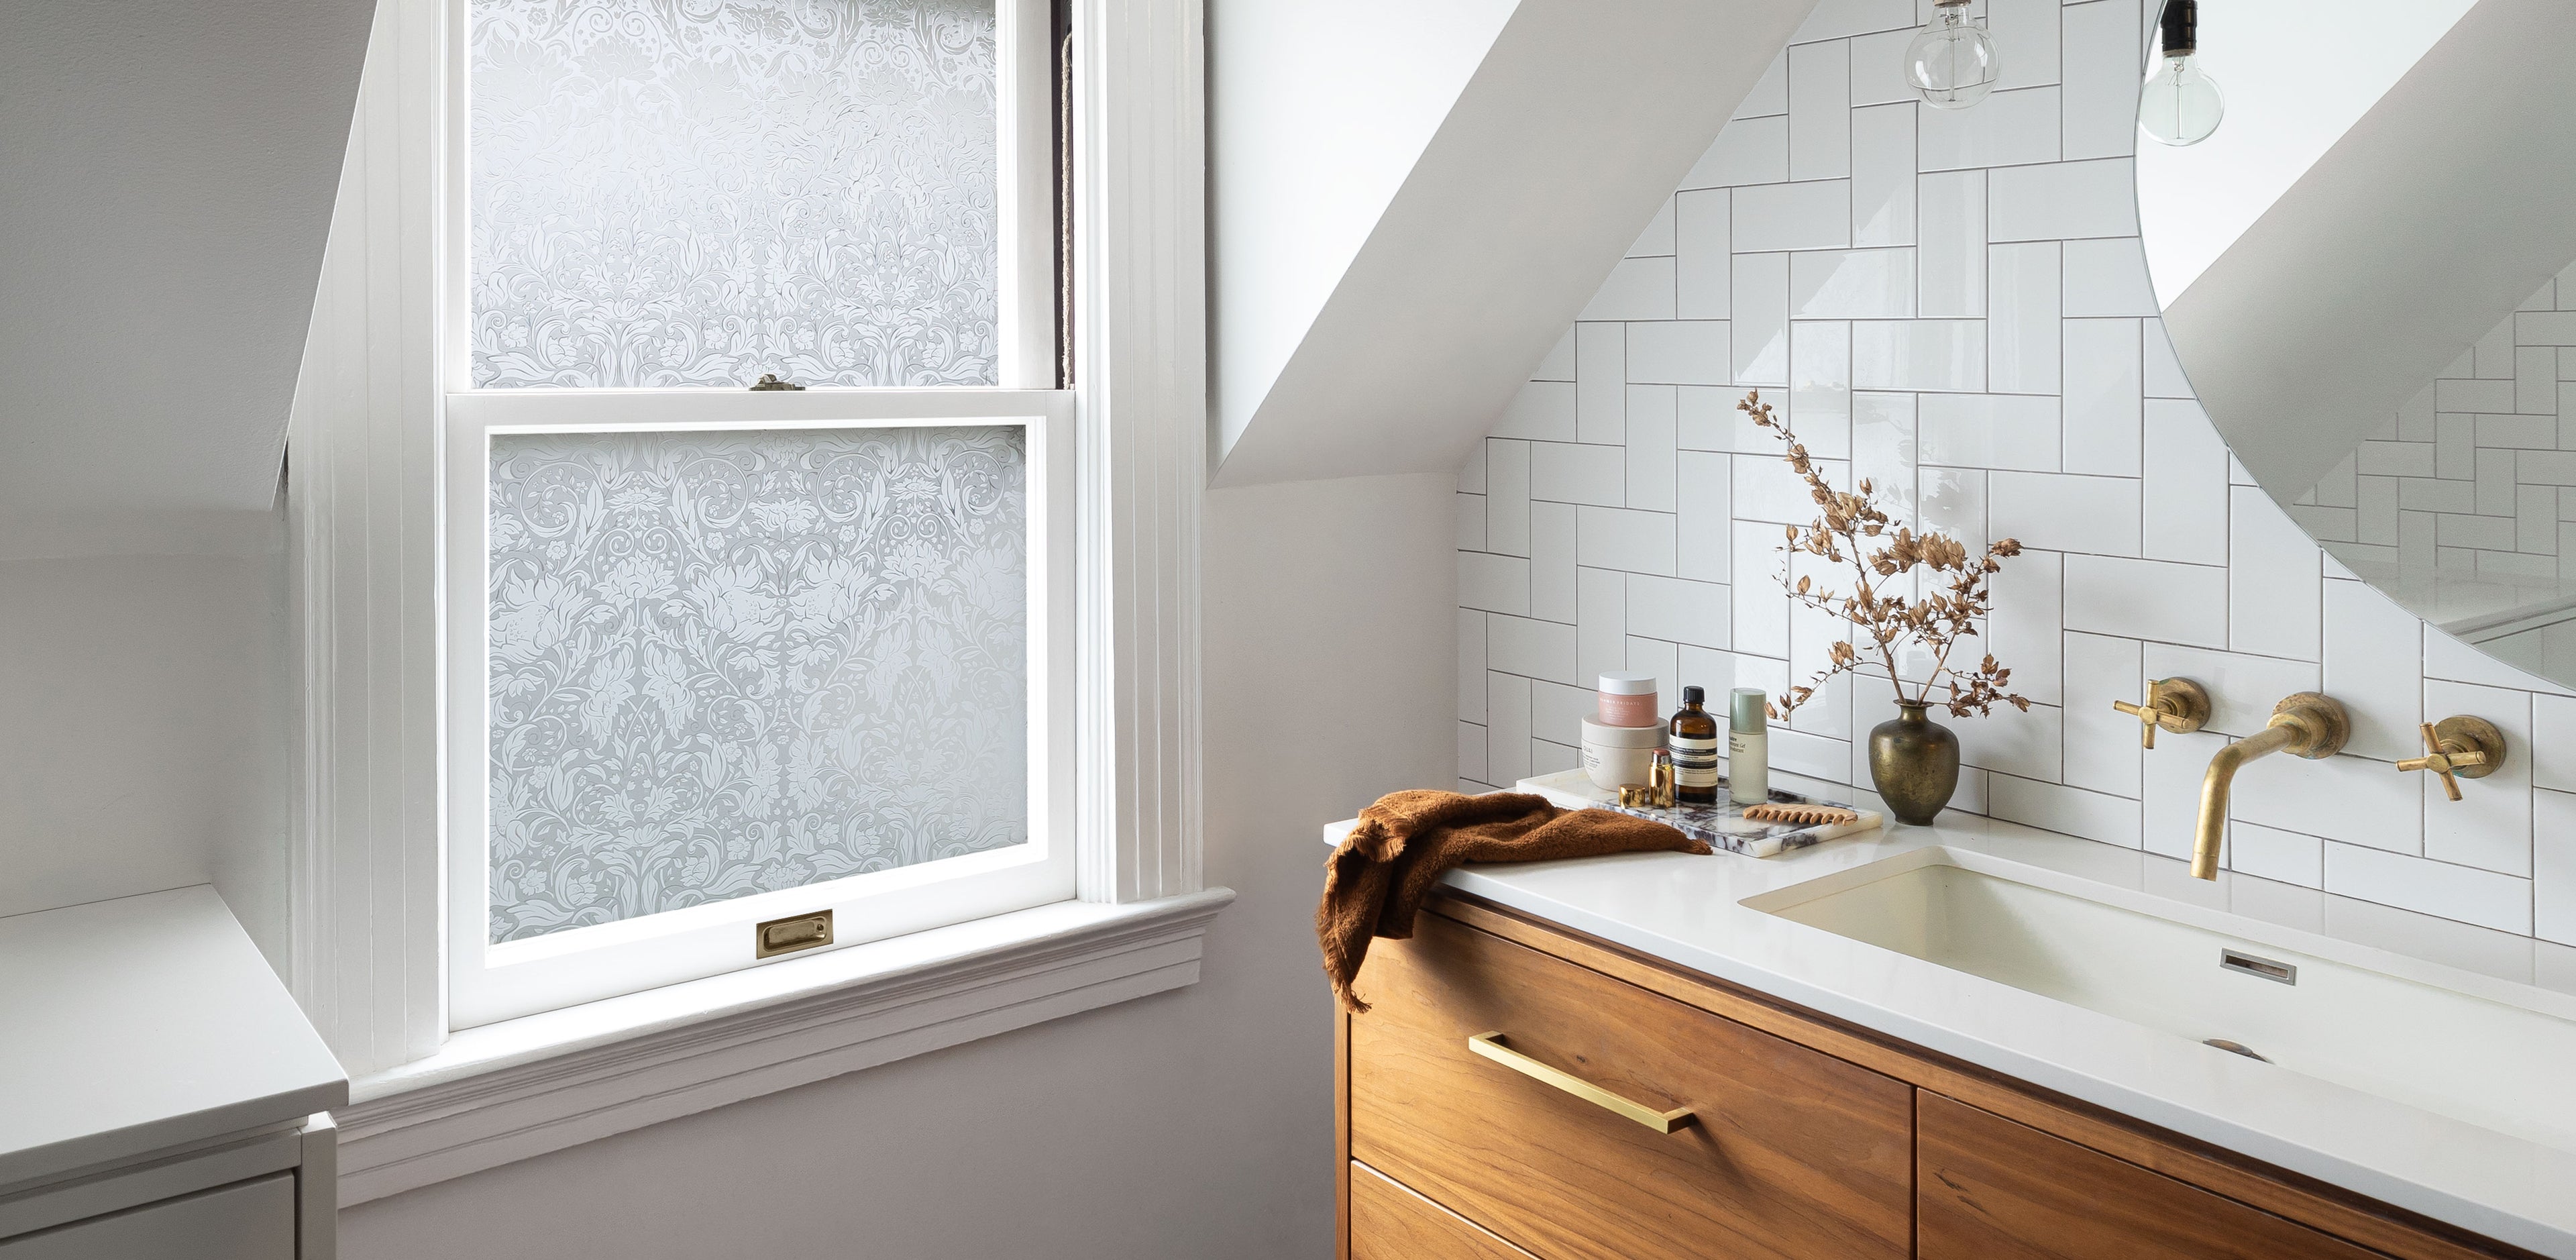 Chic bathroom interior with white walls, marble countertop, wooden cabinets, and a slanted dormer with an inset window featuring Artscape's Windsor window film with a classic floral design, enhancing privacy and style.